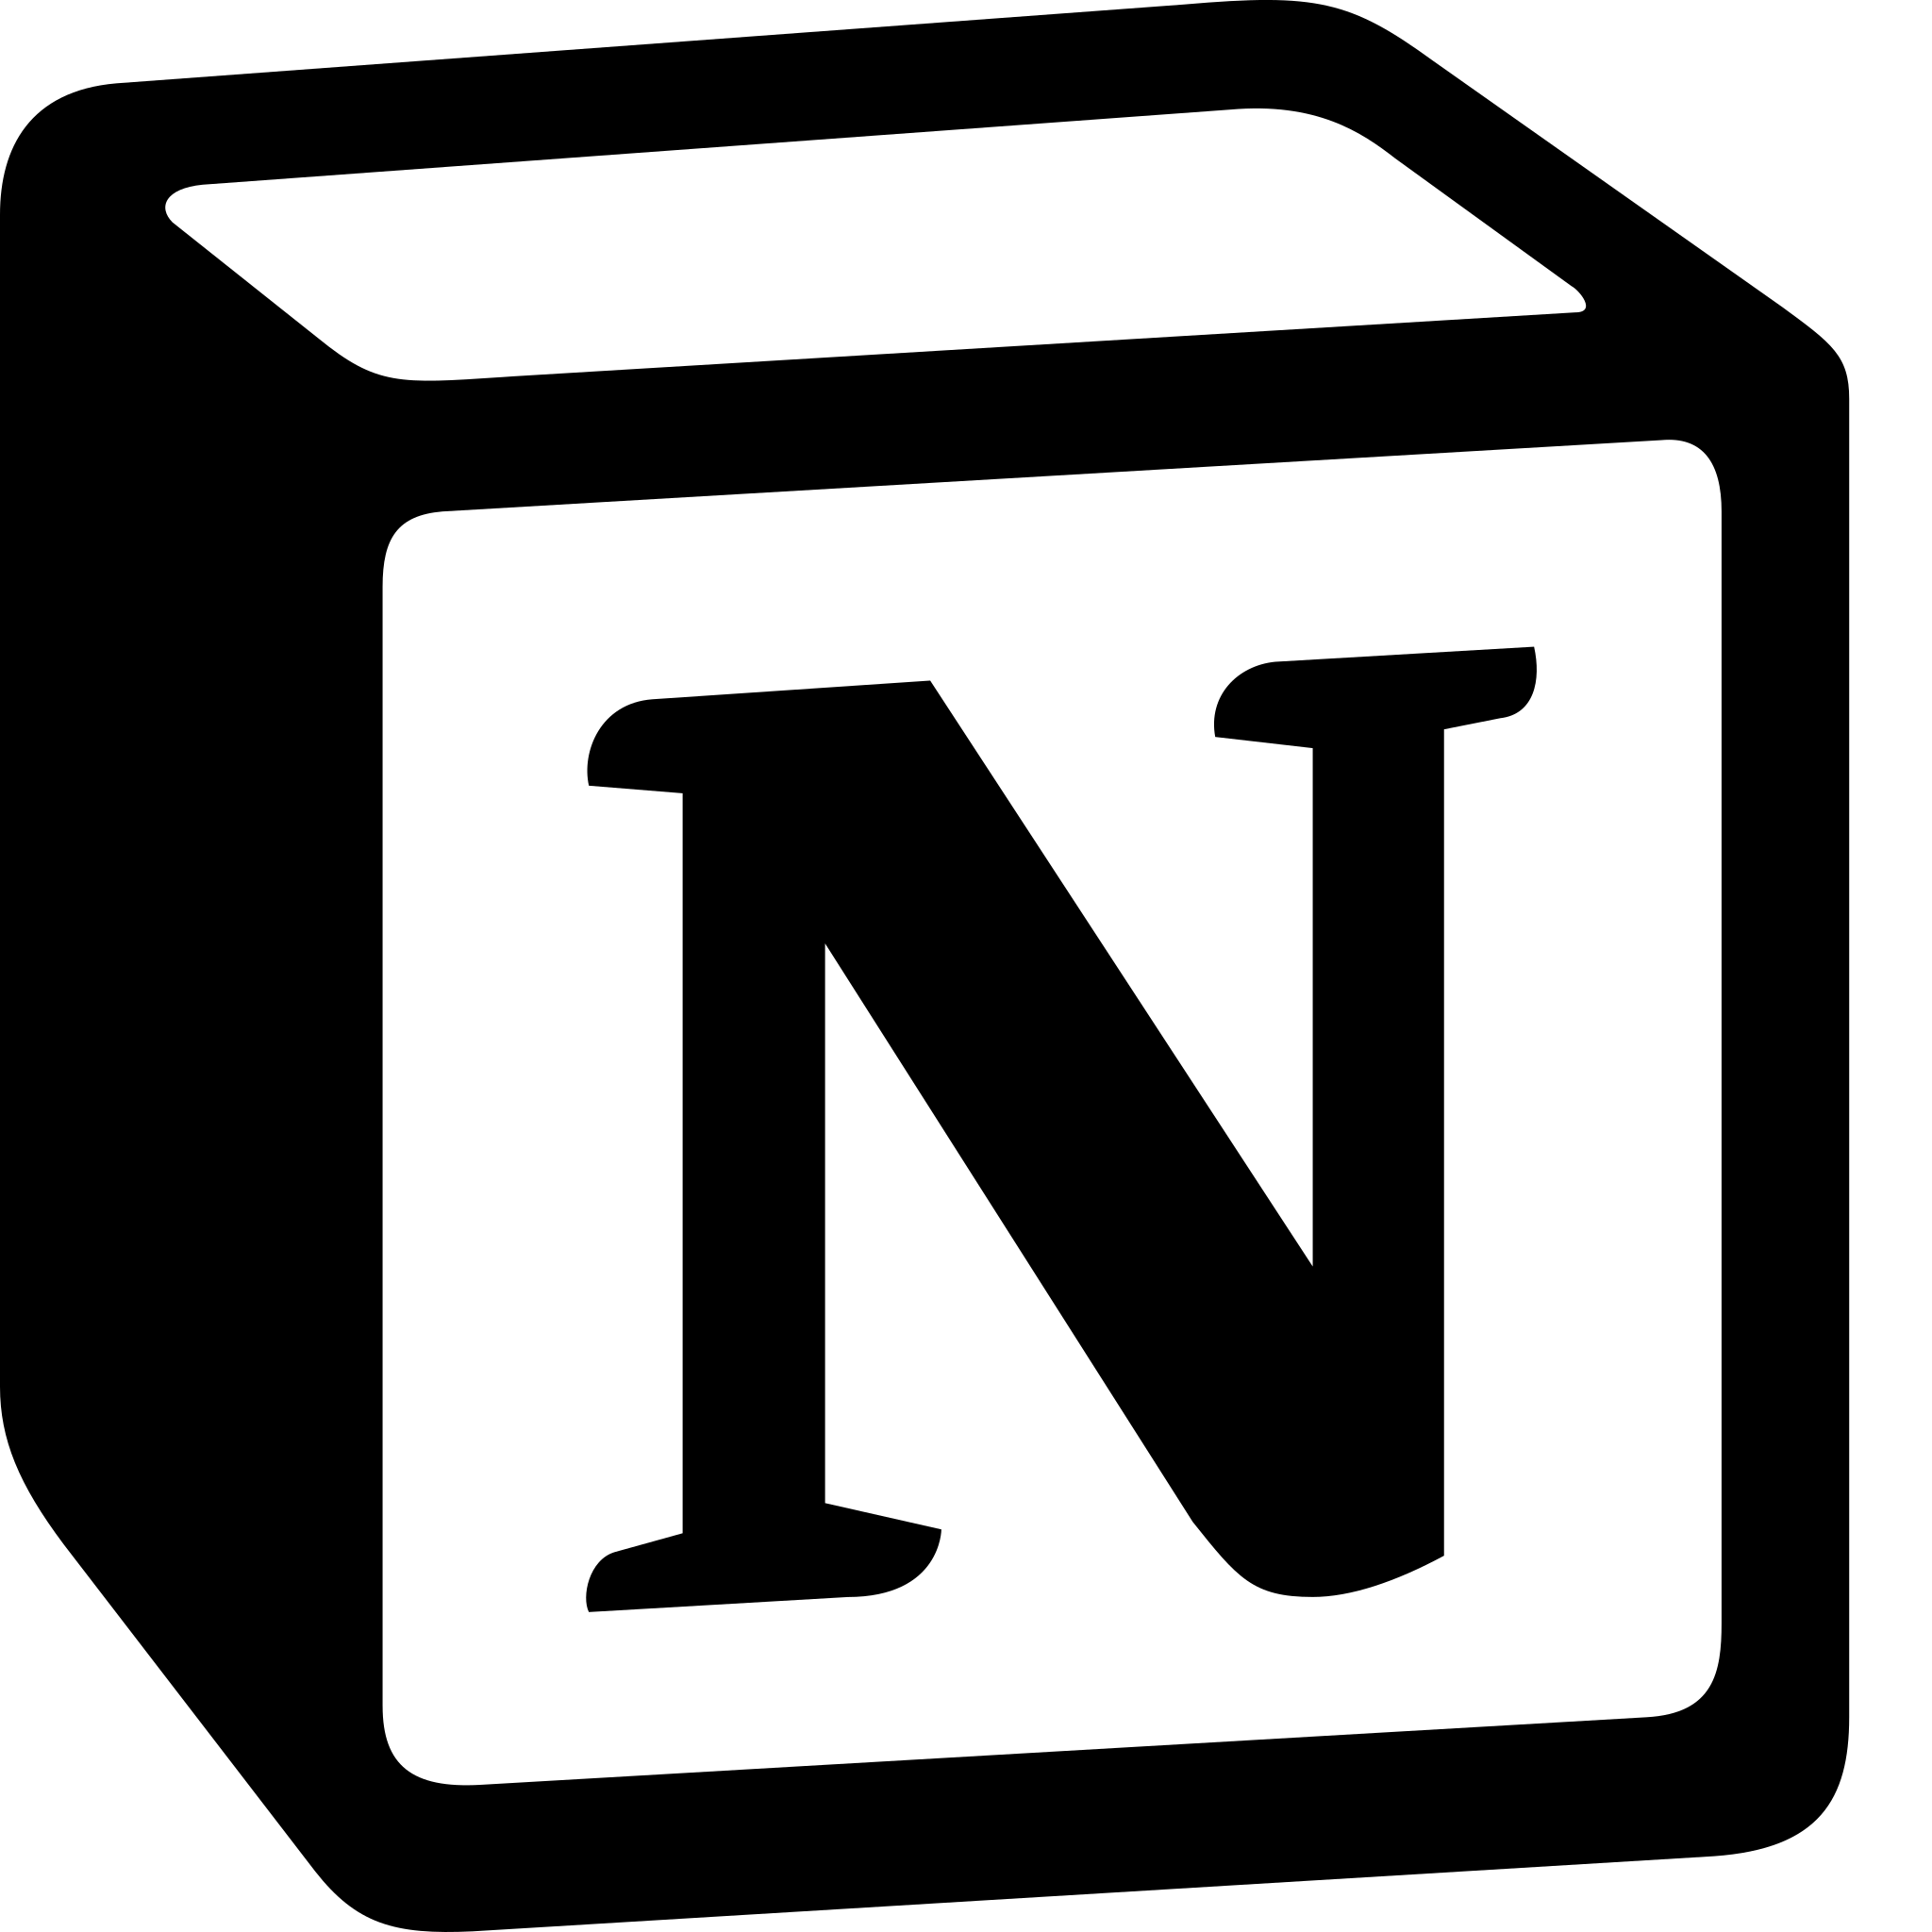 How to use Notion for Task Management?